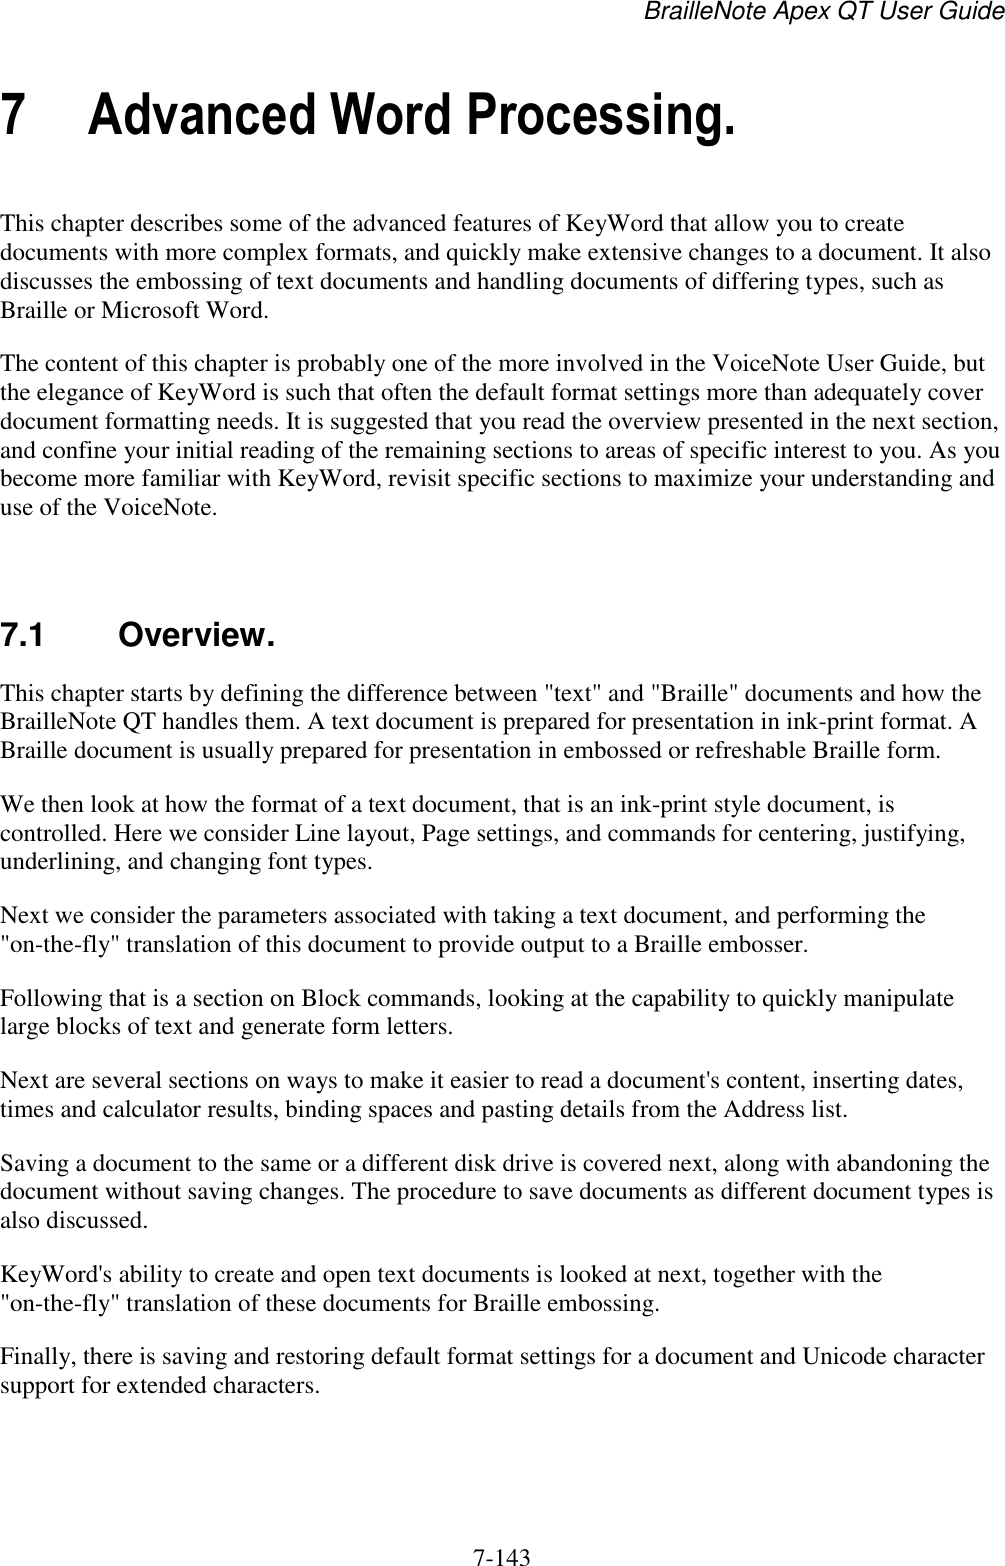 BrailleNote Apex QT User Guide  7-143   7 Advanced Word Processing. This chapter describes some of the advanced features of KeyWord that allow you to create documents with more complex formats, and quickly make extensive changes to a document. It also discusses the embossing of text documents and handling documents of differing types, such as Braille or Microsoft Word. The content of this chapter is probably one of the more involved in the VoiceNote User Guide, but the elegance of KeyWord is such that often the default format settings more than adequately cover document formatting needs. It is suggested that you read the overview presented in the next section, and confine your initial reading of the remaining sections to areas of specific interest to you. As you become more familiar with KeyWord, revisit specific sections to maximize your understanding and use of the VoiceNote.   7.1  Overview. This chapter starts by defining the difference between &quot;text&quot; and &quot;Braille&quot; documents and how the BrailleNote QT handles them. A text document is prepared for presentation in ink-print format. A Braille document is usually prepared for presentation in embossed or refreshable Braille form. We then look at how the format of a text document, that is an ink-print style document, is controlled. Here we consider Line layout, Page settings, and commands for centering, justifying, underlining, and changing font types. Next we consider the parameters associated with taking a text document, and performing the &quot;on-the-fly&quot; translation of this document to provide output to a Braille embosser. Following that is a section on Block commands, looking at the capability to quickly manipulate large blocks of text and generate form letters. Next are several sections on ways to make it easier to read a document&apos;s content, inserting dates, times and calculator results, binding spaces and pasting details from the Address list. Saving a document to the same or a different disk drive is covered next, along with abandoning the document without saving changes. The procedure to save documents as different document types is also discussed. KeyWord&apos;s ability to create and open text documents is looked at next, together with the &quot;on-the-fly&quot; translation of these documents for Braille embossing. Finally, there is saving and restoring default format settings for a document and Unicode character support for extended characters.   